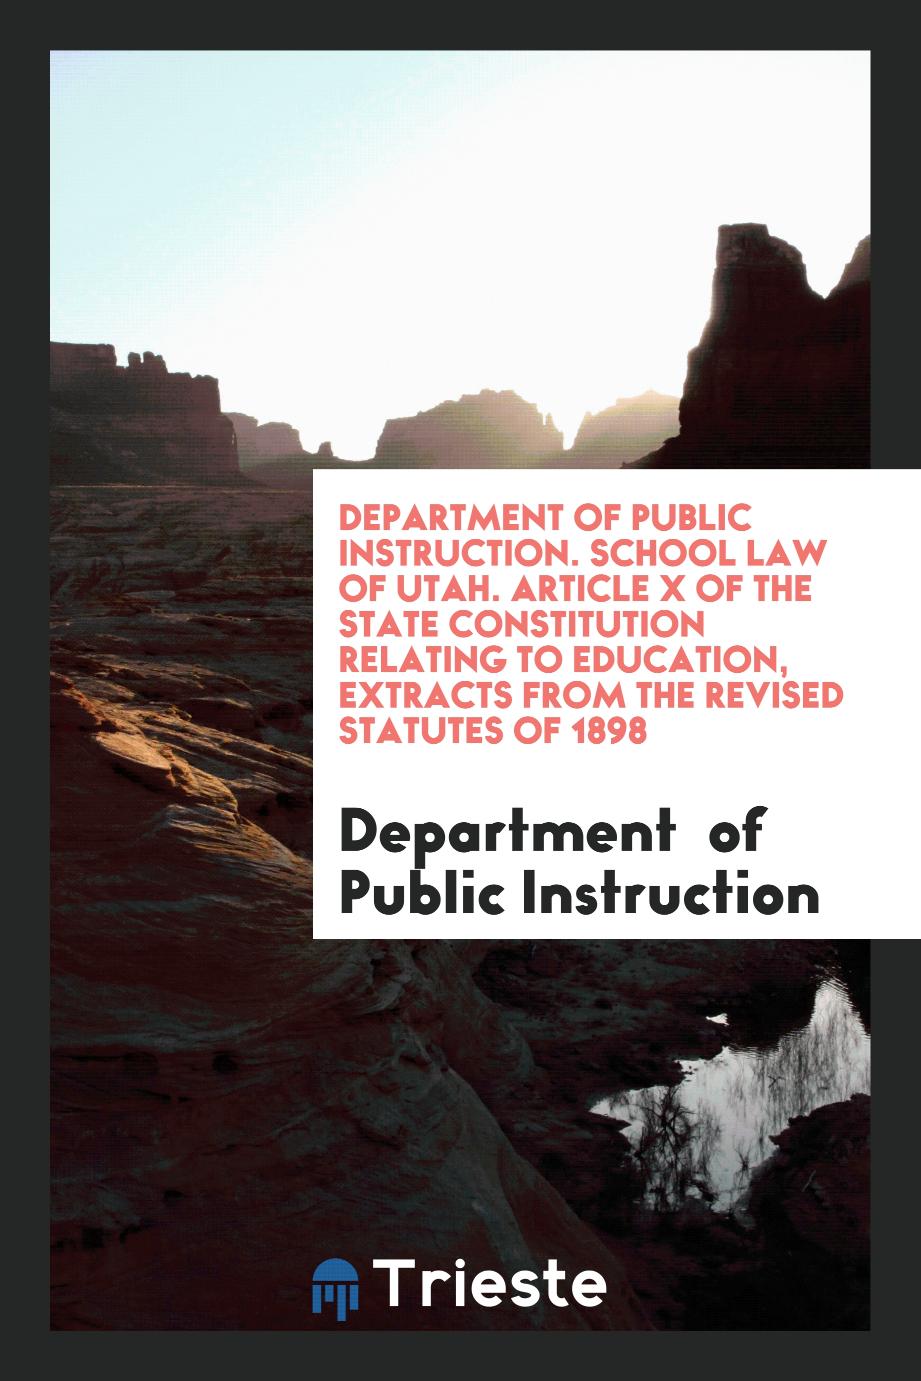 Department of Public Instruction. School Law of Utah. Article X of the State Constitution Relating to Education, Extracts from the Revised Statutes of 1898